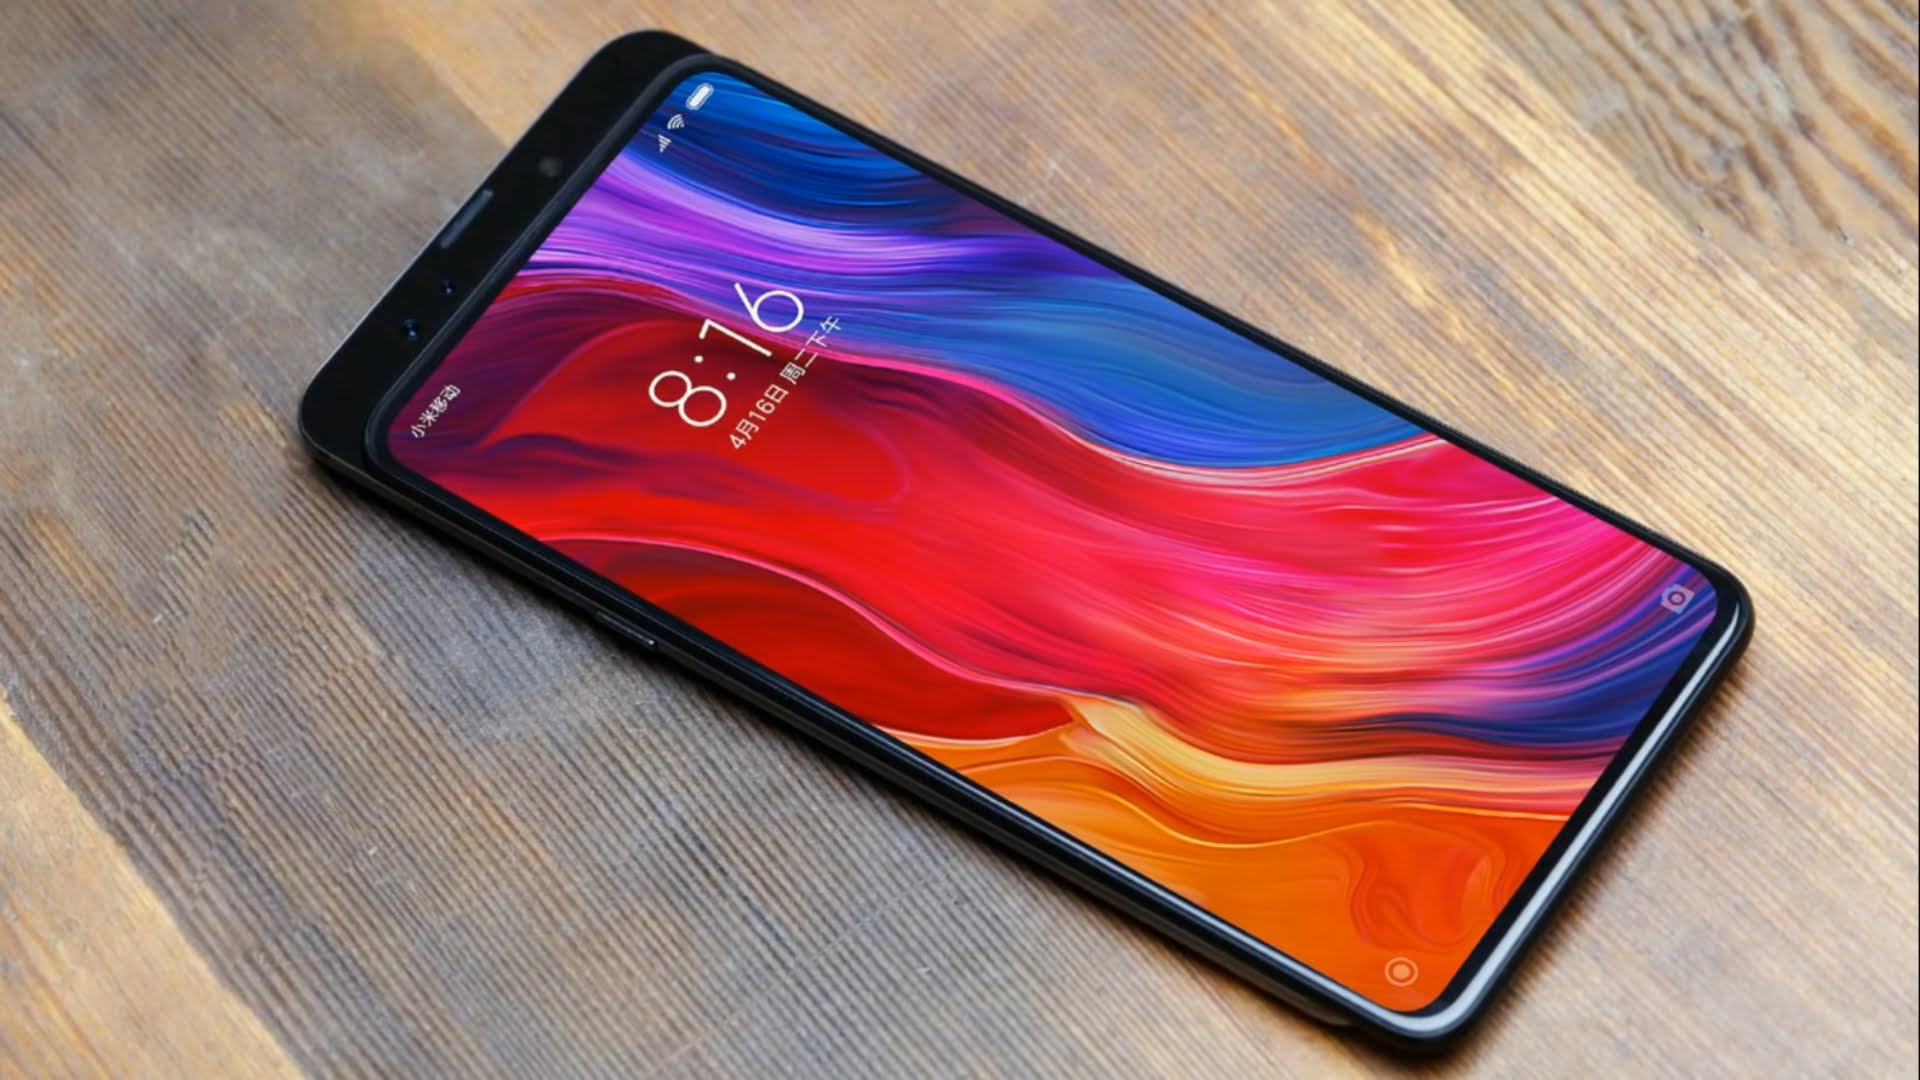 Mi Mix 3 Will Support 5G And 10Gb Of Ram – Confirmed